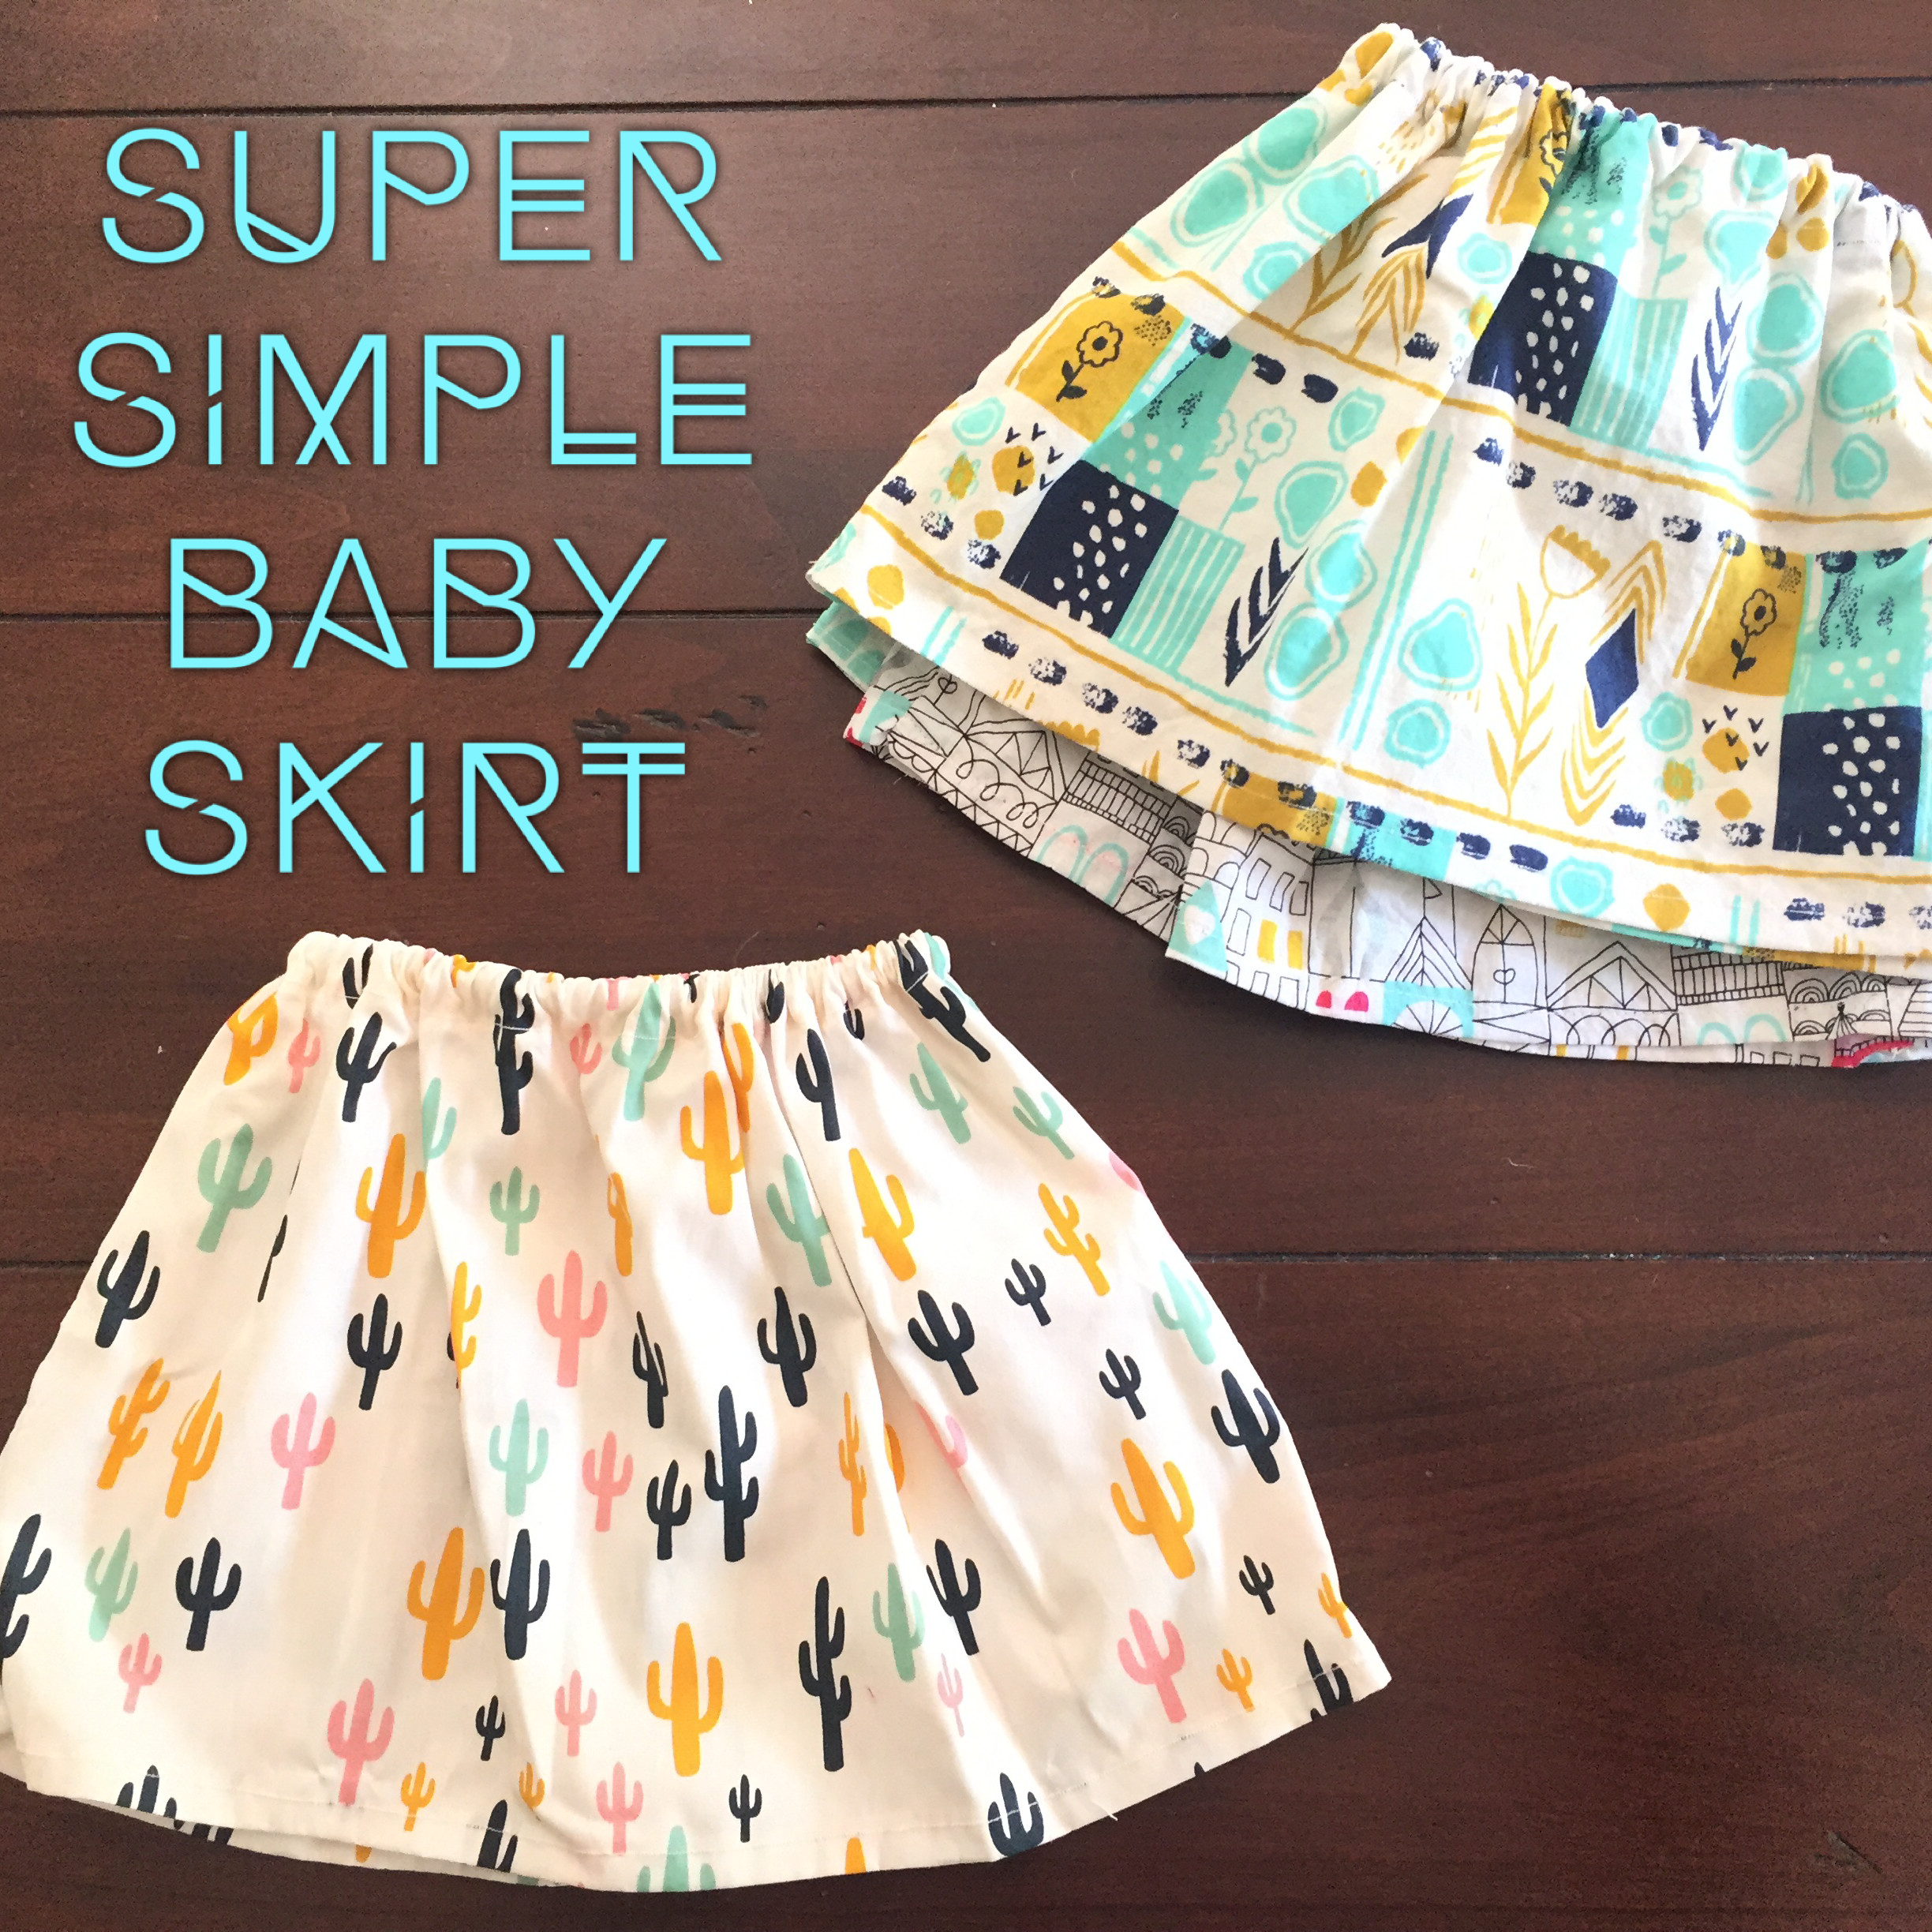 Diy Projects For Baby
 super simple baby skirt sewing project – diy